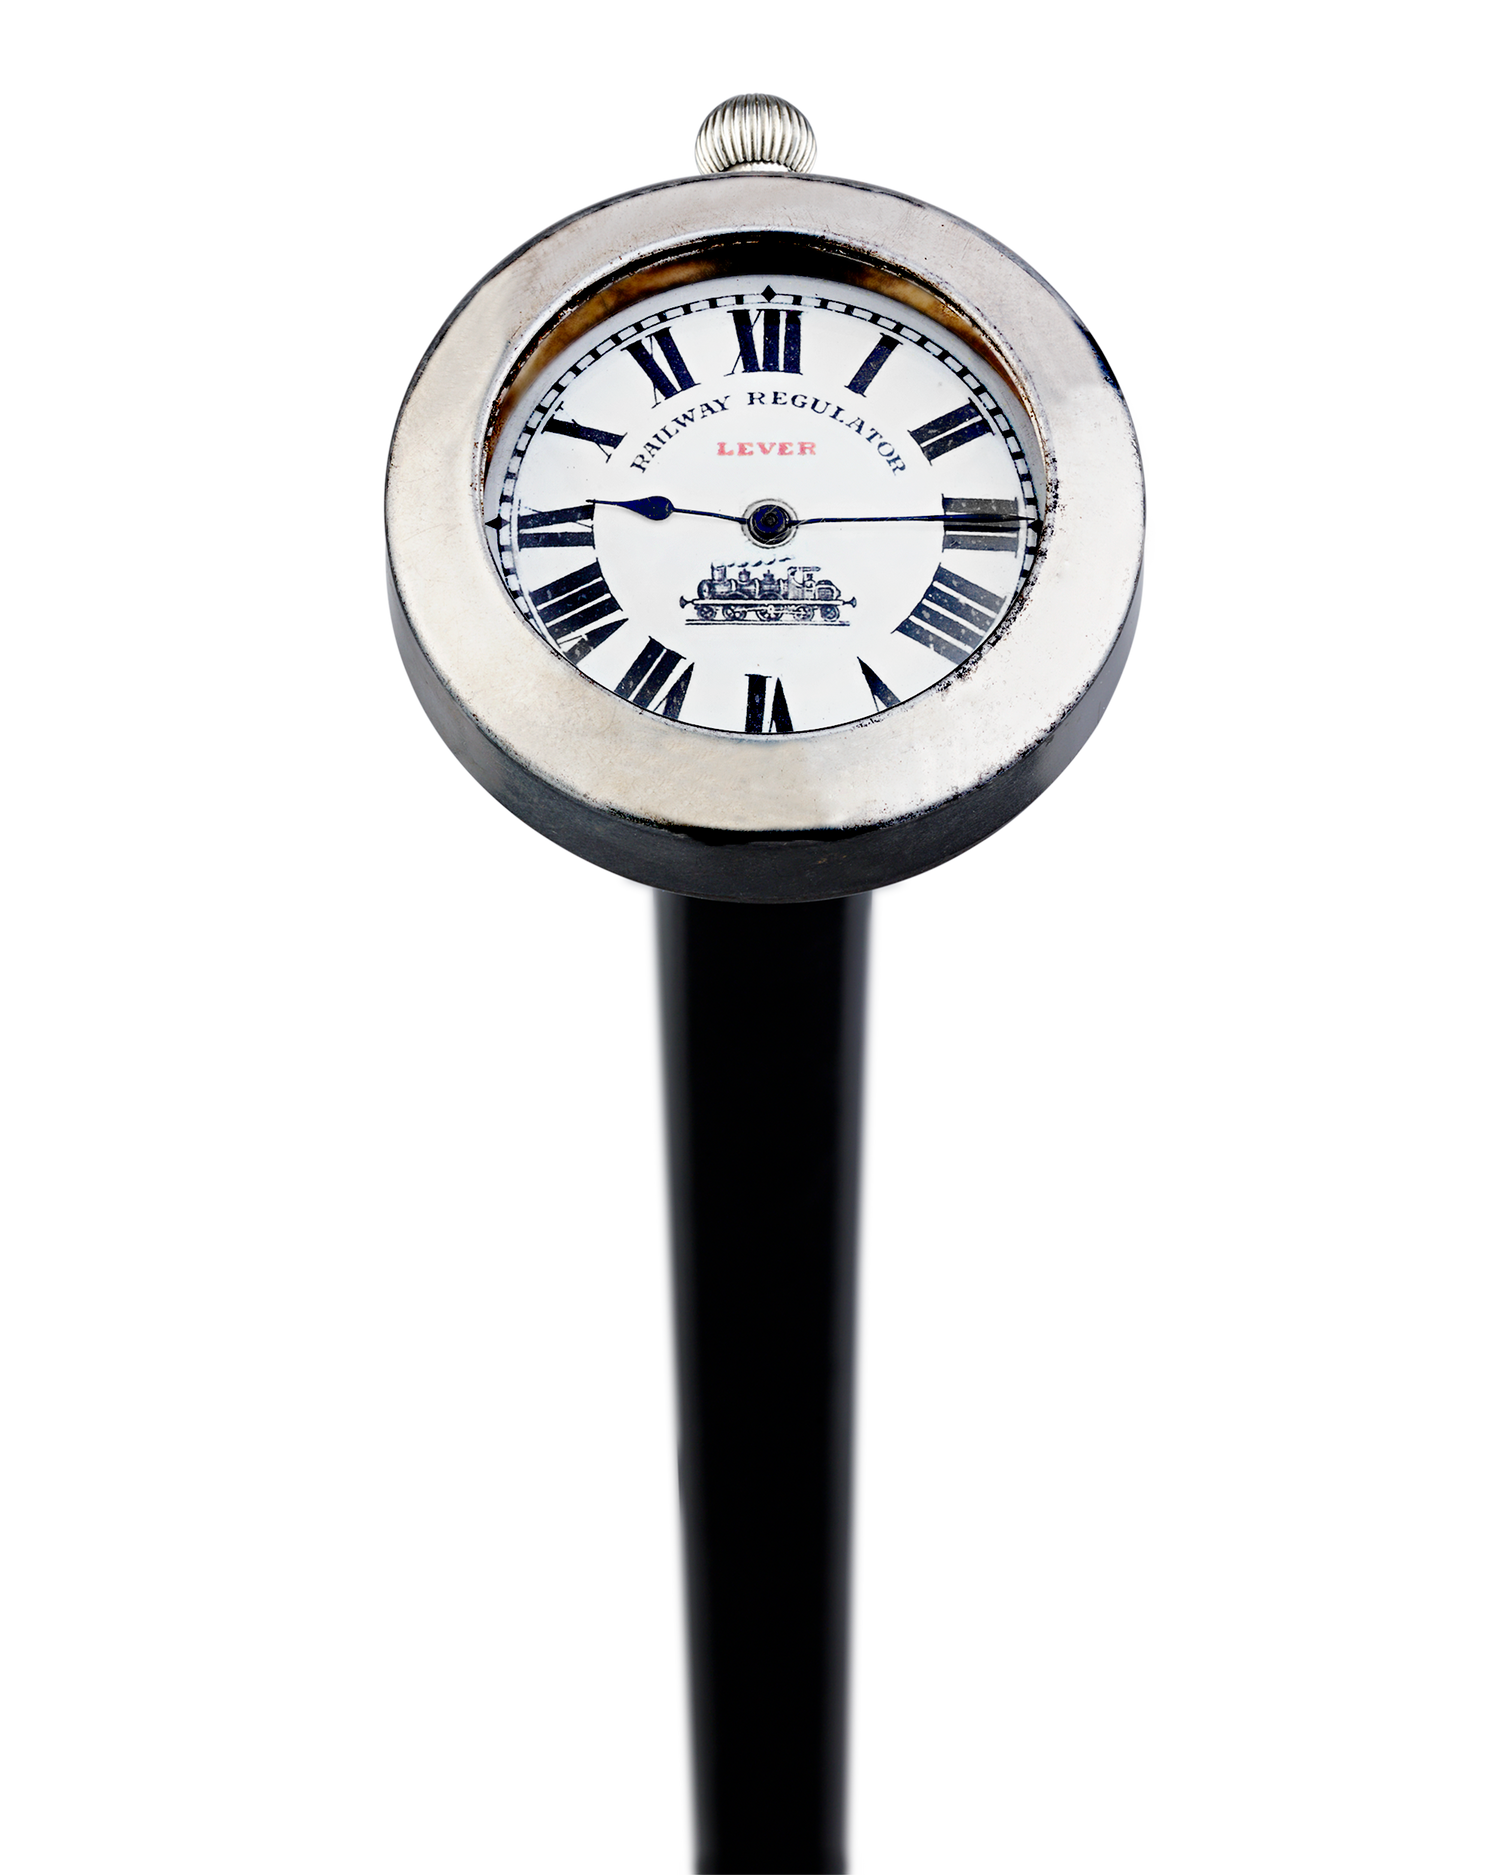 Stationmaster's Watch Cane